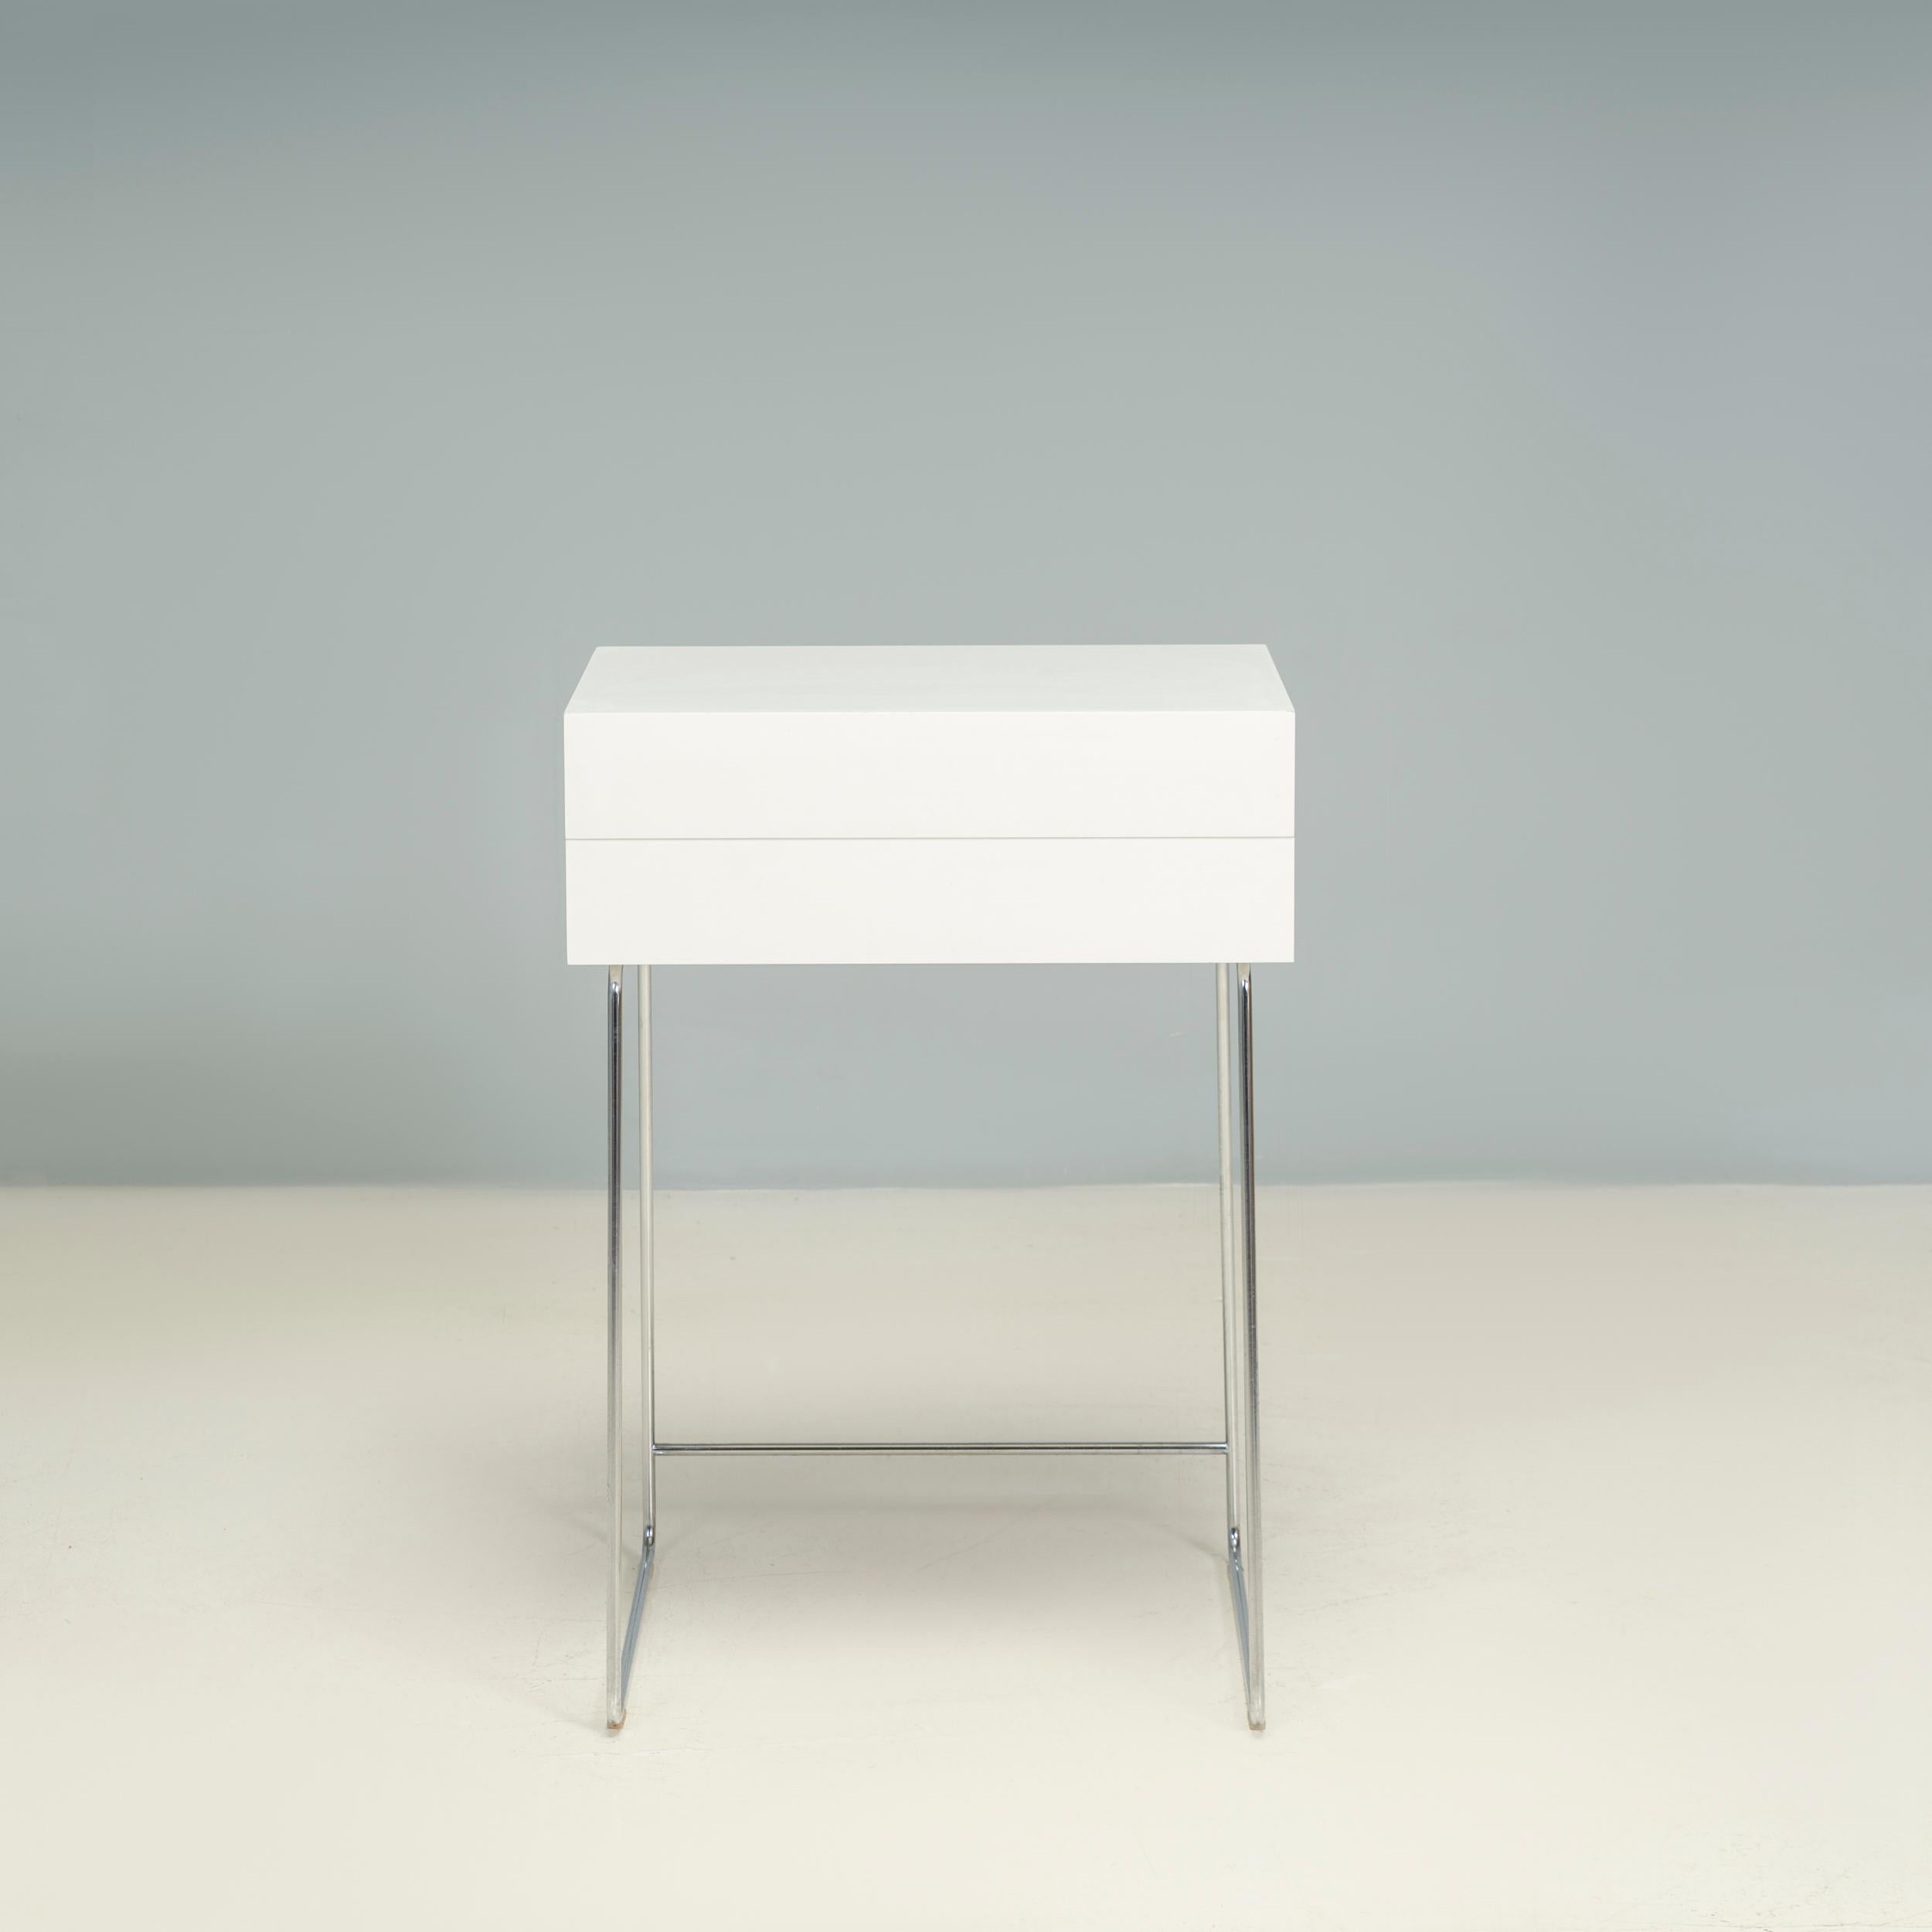 Originally designed by Julie Pfligersdorffer for Ligne Roset in 2008, the Poms desk gives the classic secretaires a contemporary twist.

Constructed from two layers of white laminate, the desk sits on angled chrome sled legs.

The top of the desk